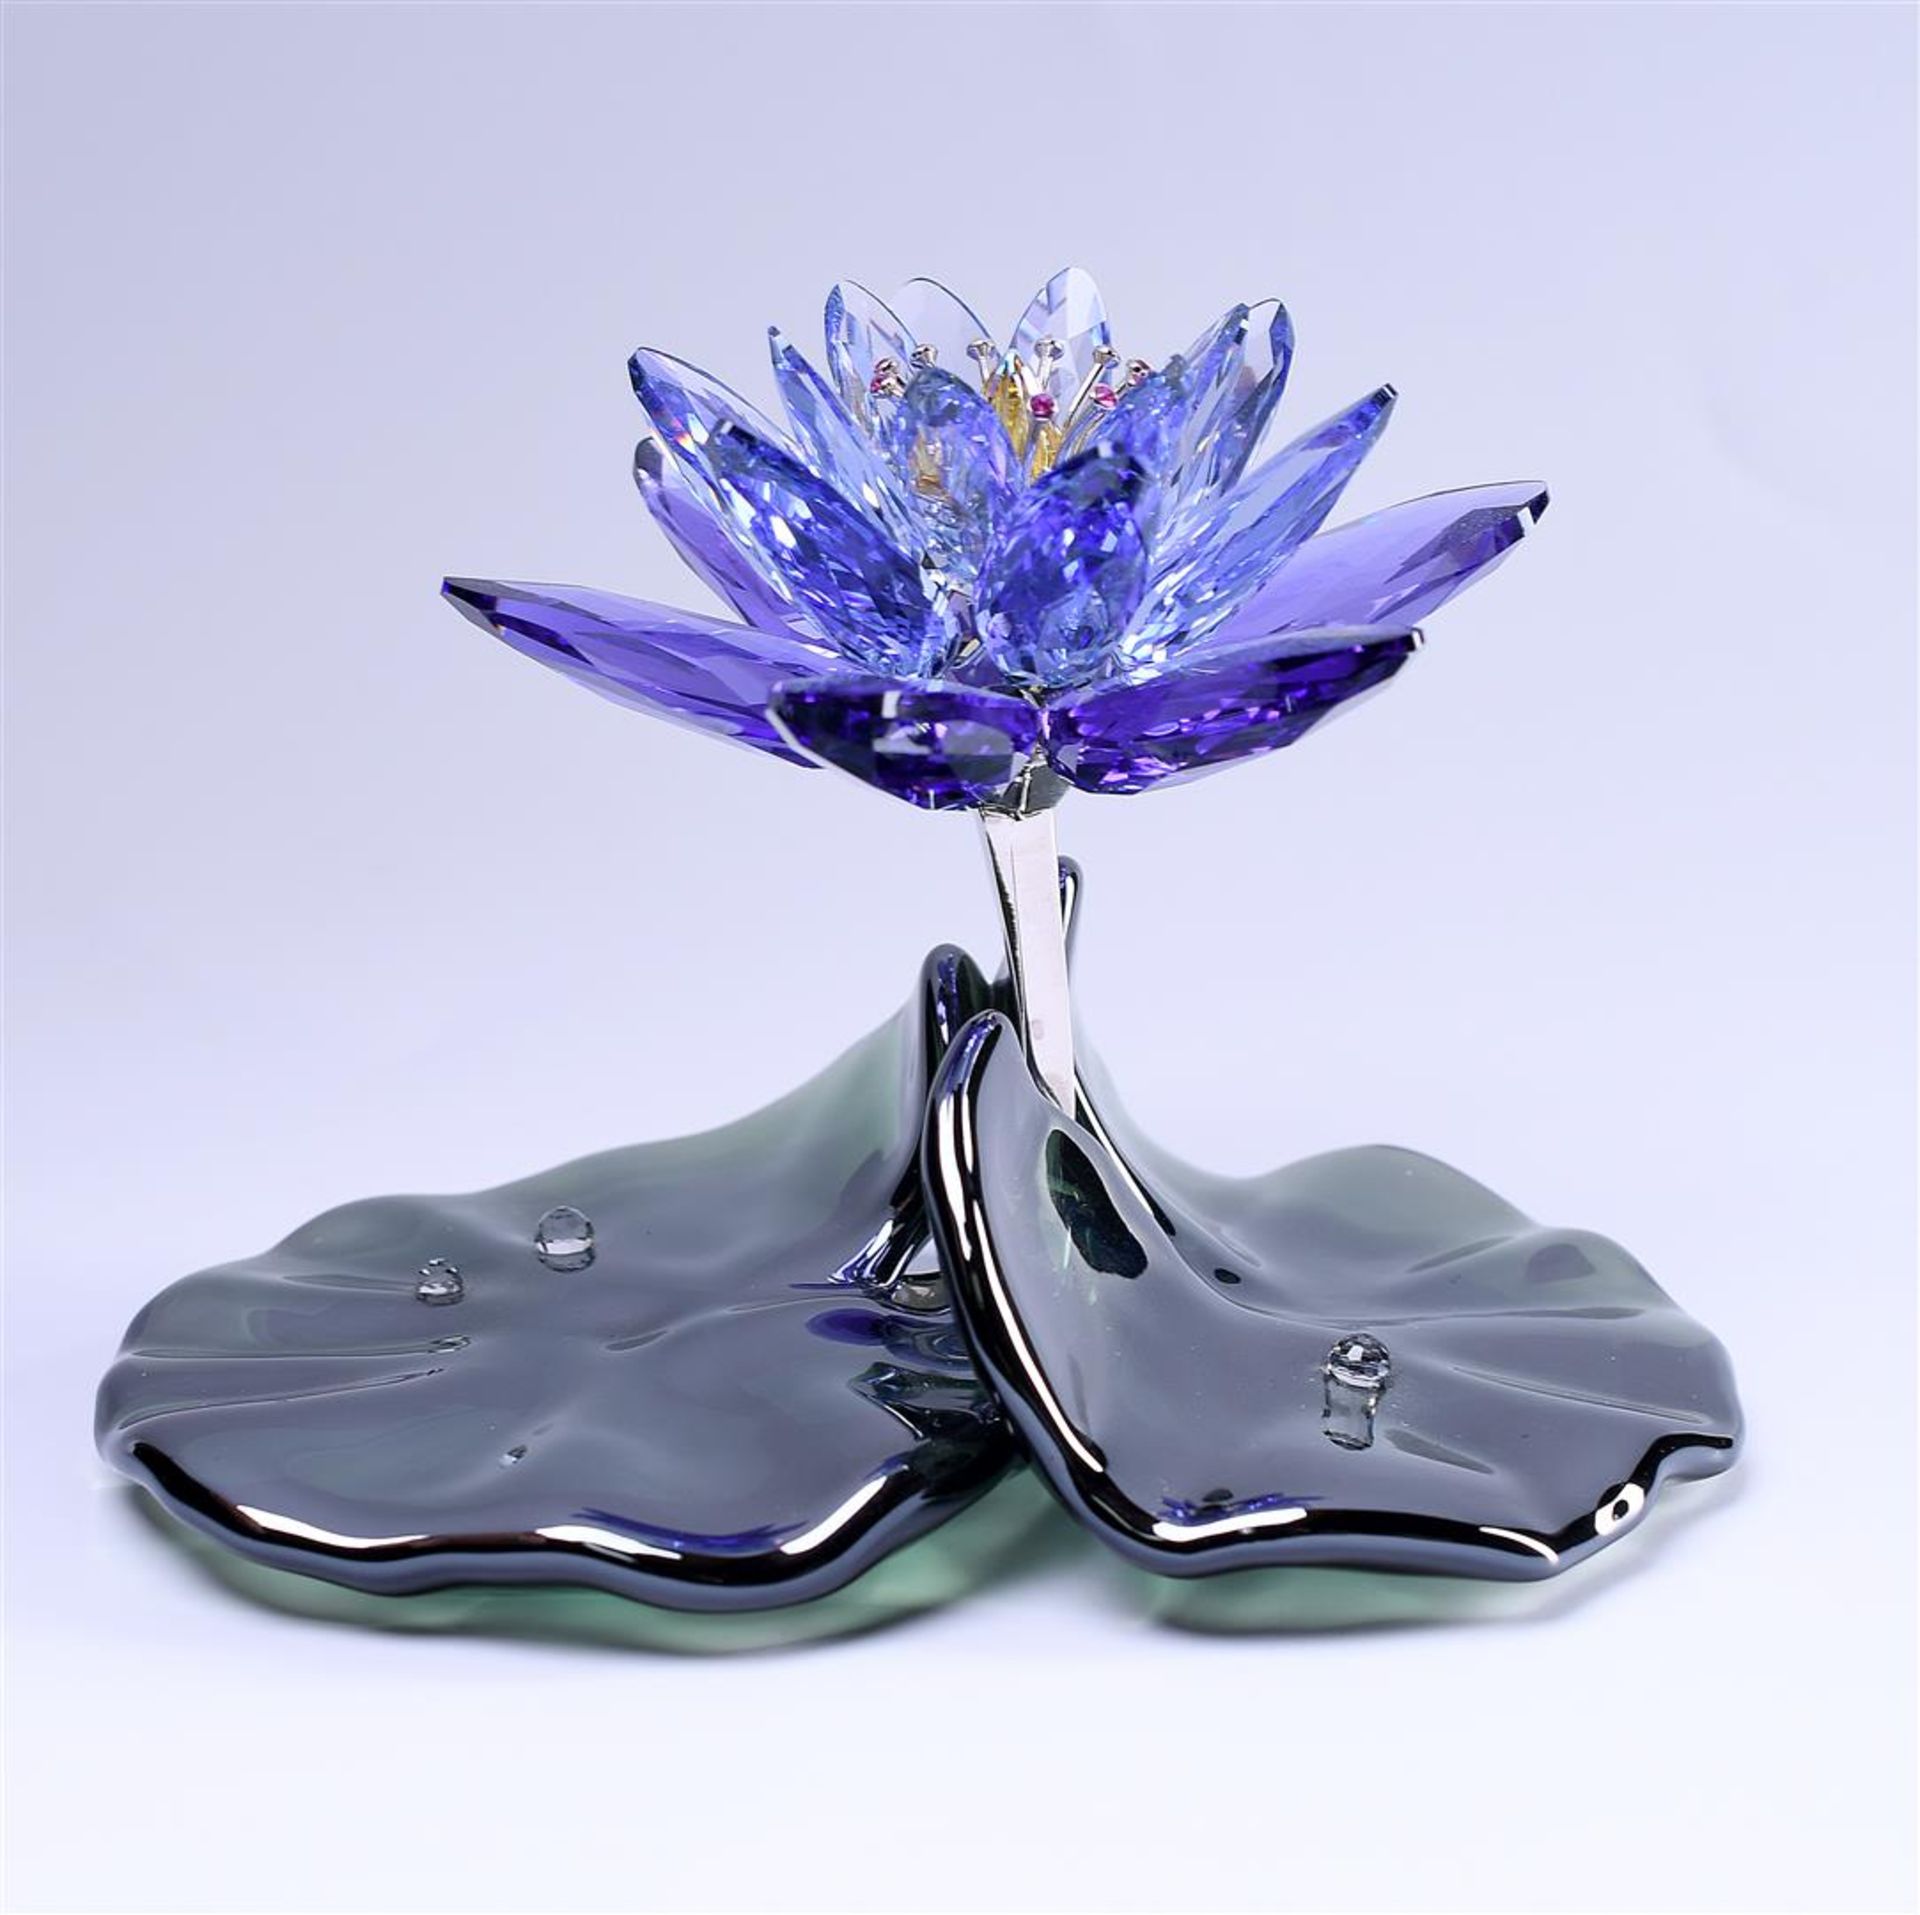 Swarovski, Water Lily - Blue Violet, Year of issue 2012, 1141630. Includes original box.
7.3 x 10.8  - Image 2 of 4